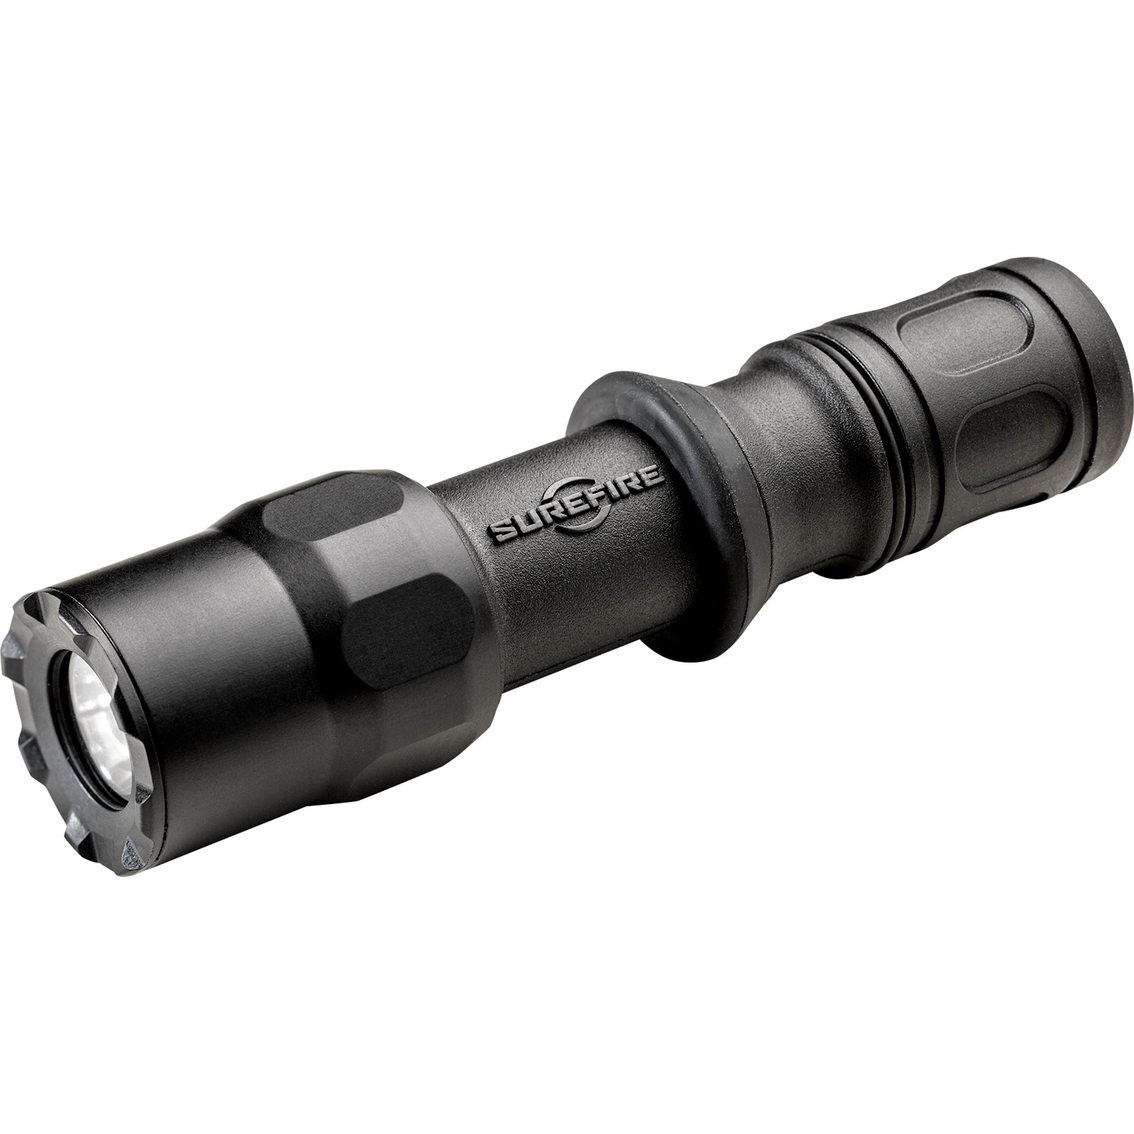 Surefire G2Z Combat Light with MaxVision - Image 4 of 5